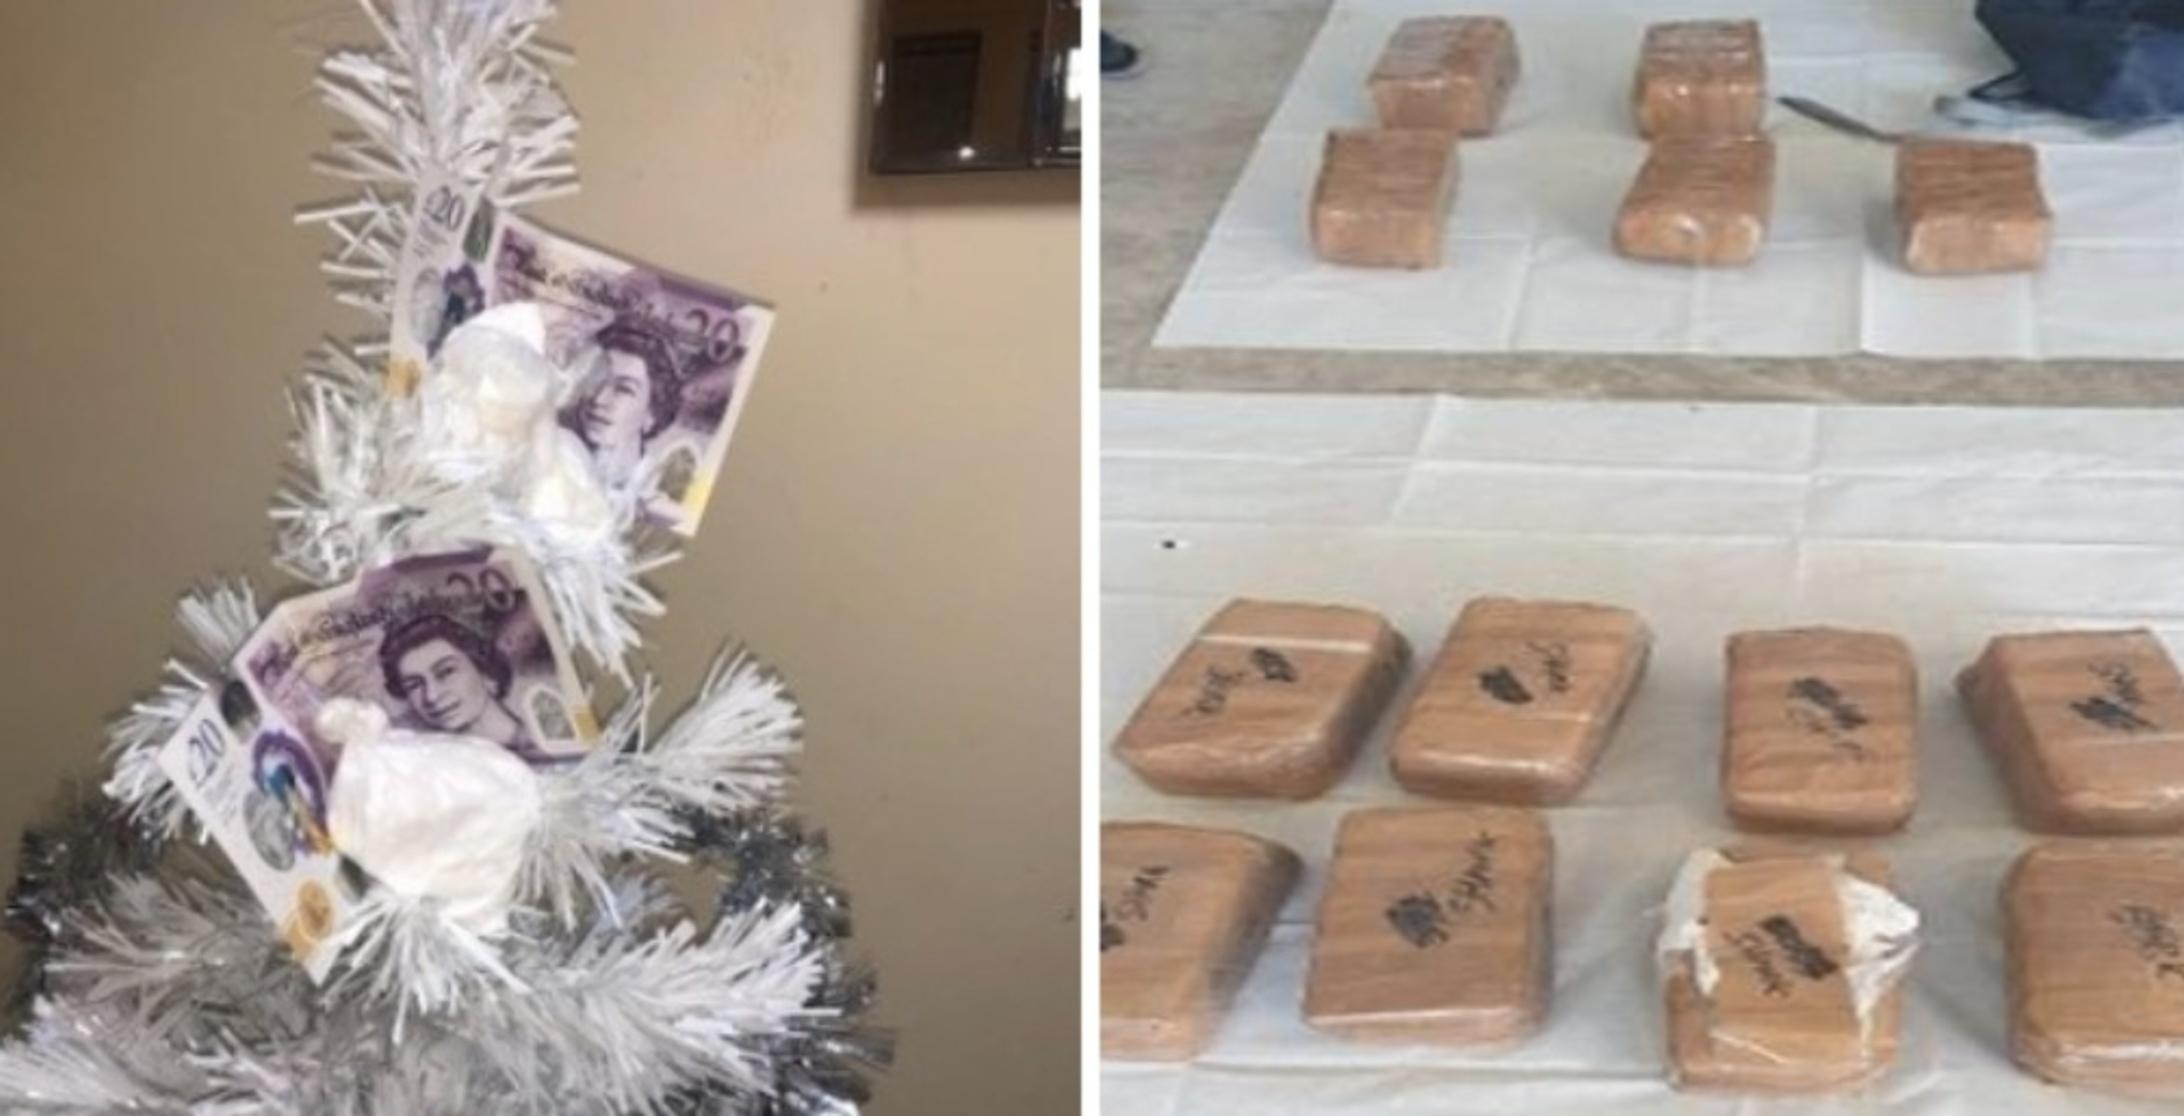 man given 89 years prison for decorating christmas tree